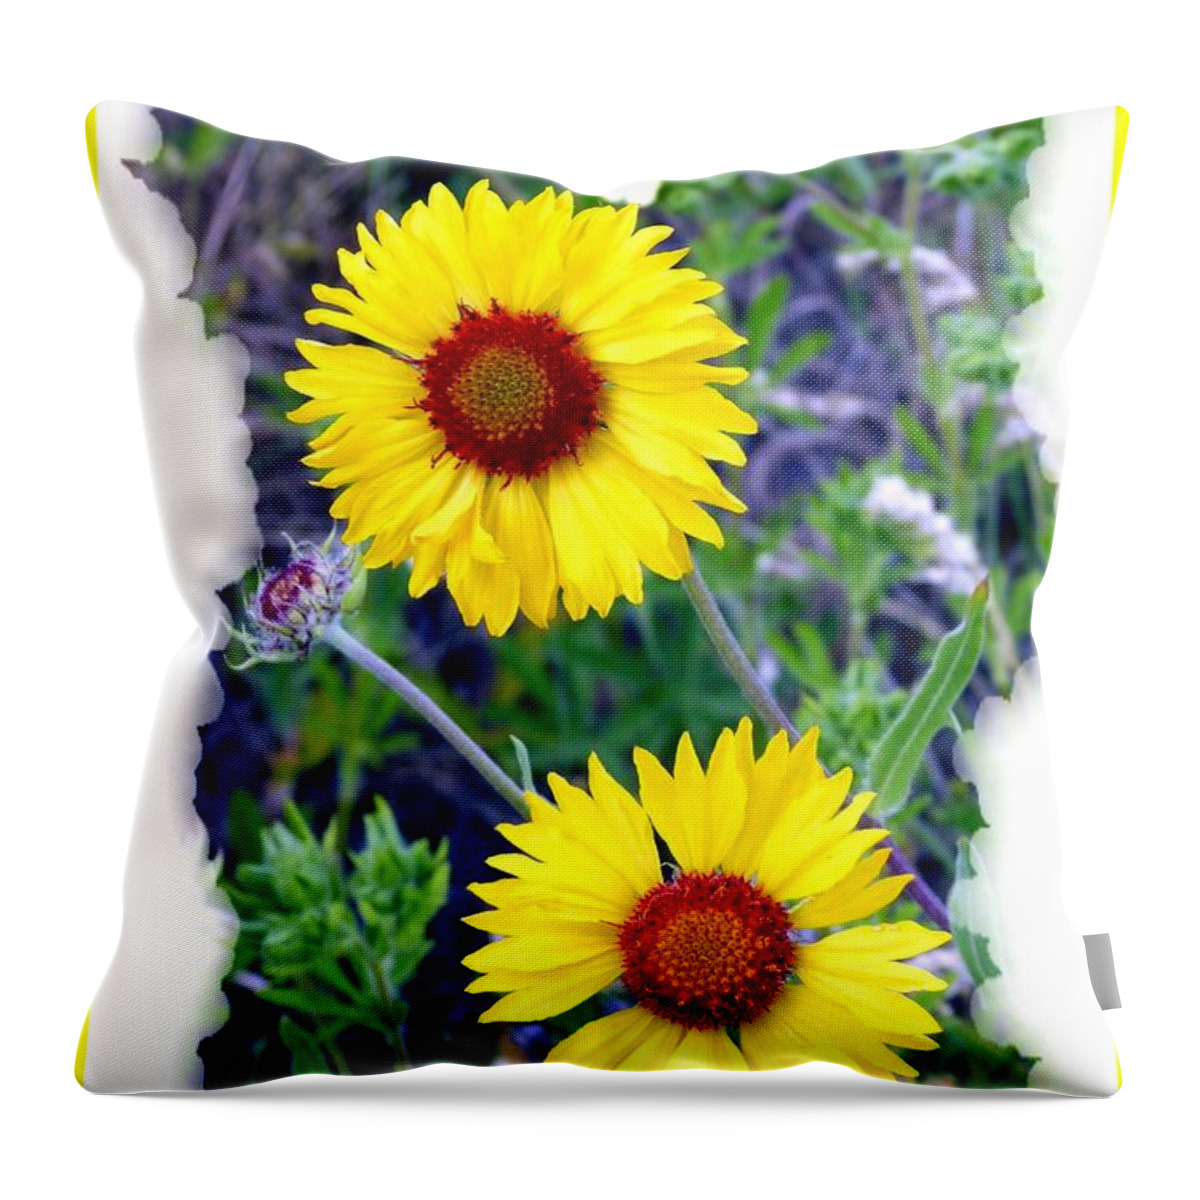 Brown-eyed Susans Throw Pillow featuring the photograph Brown- Eyed Susans by Will Borden